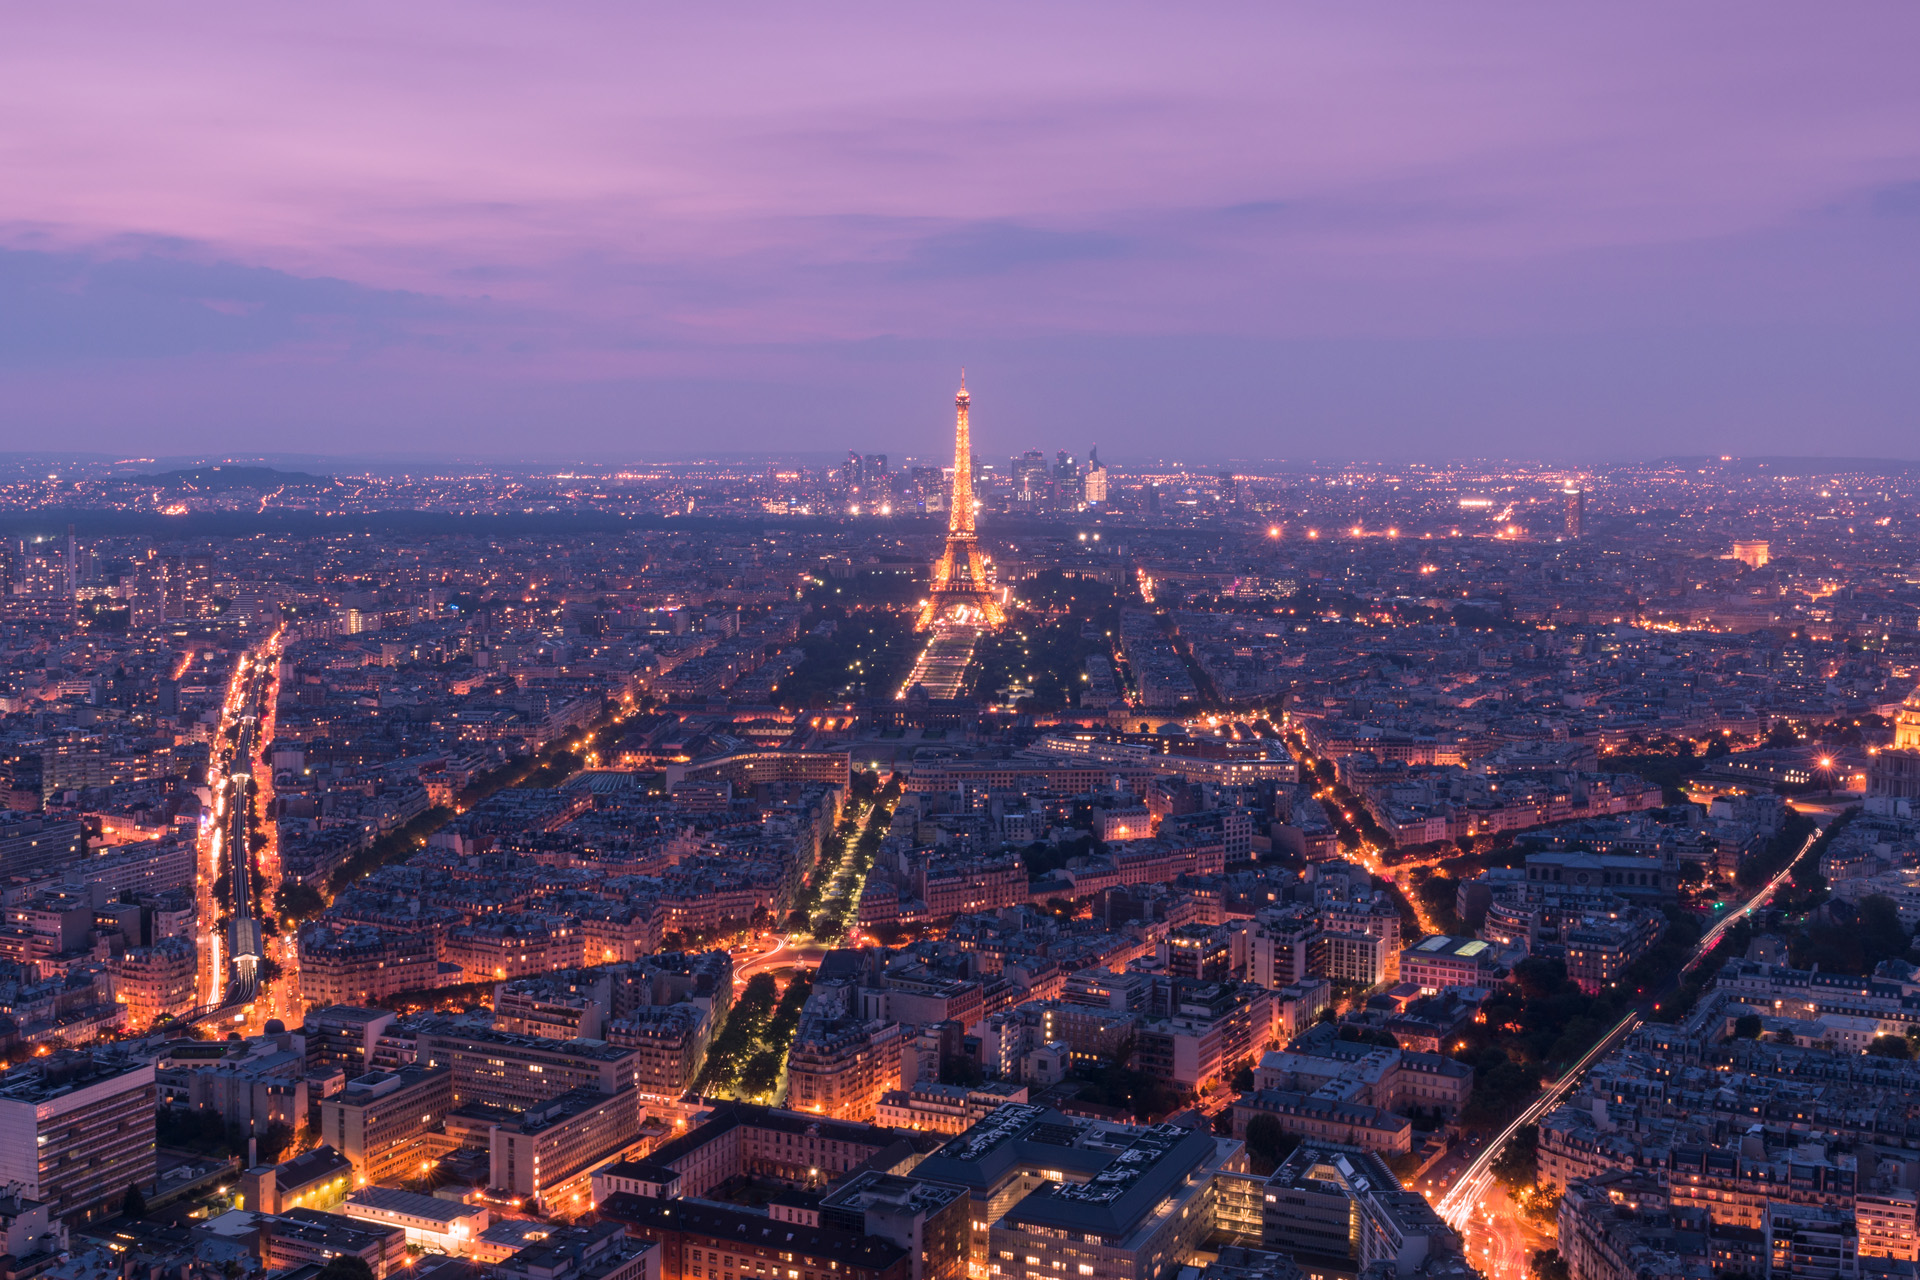 Paris, France - August 28, 2013: An aerial view of the city of Paris, France at dusk with the Eiffel Tower in the Centre.